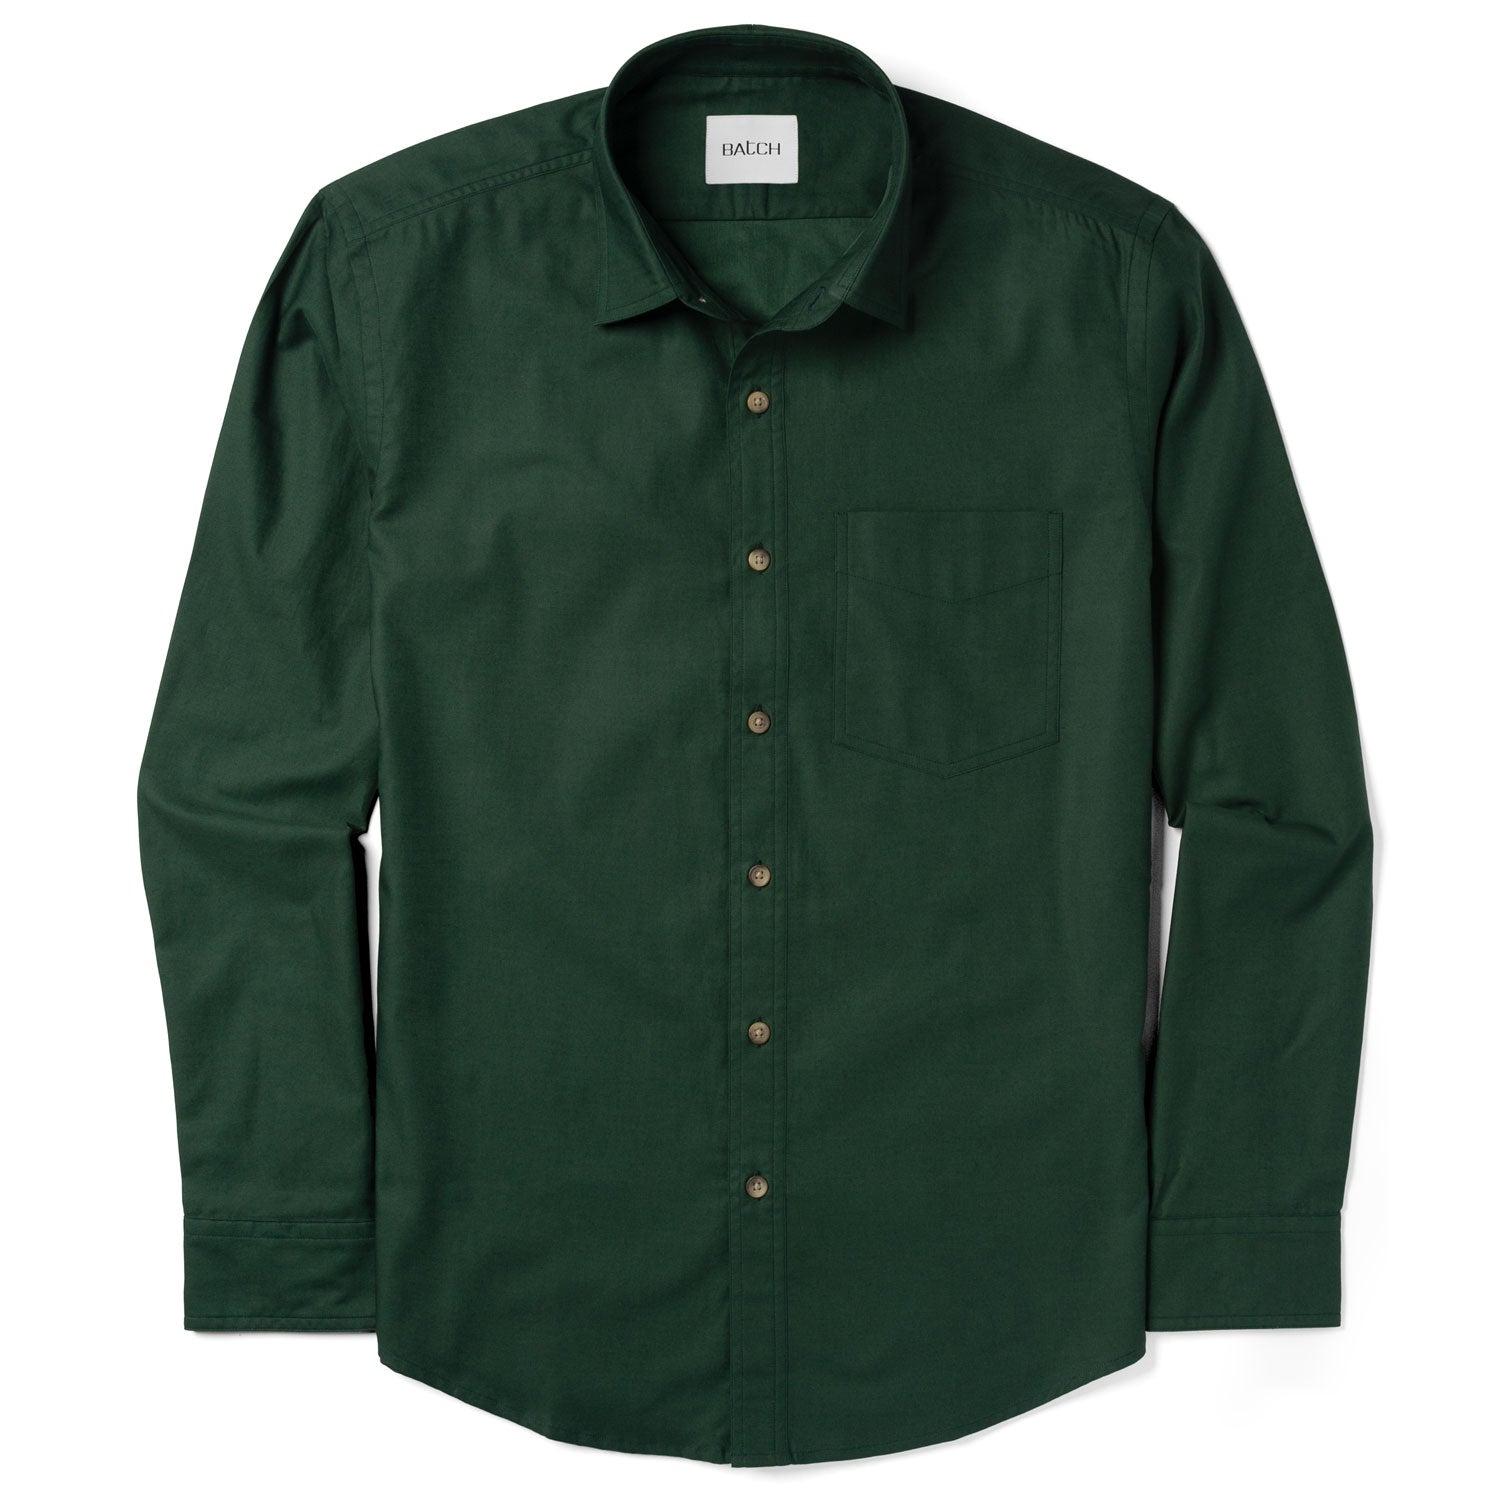 Essential 1 Pocket Casual Shirt - Forest Green Mercerized Cotton